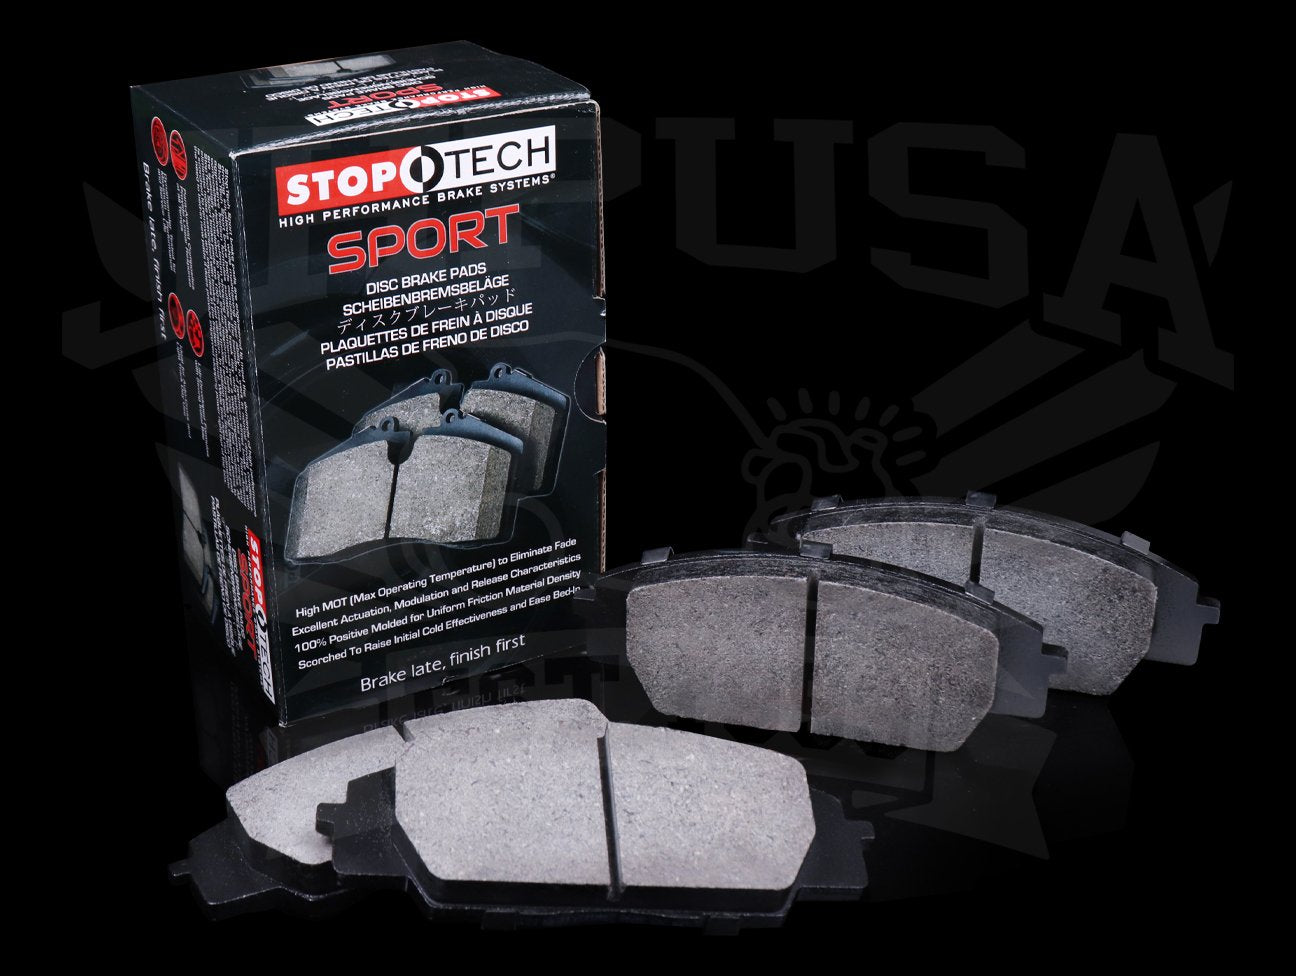 StopTech 309 Street Performance Front Brake Pads - Acura